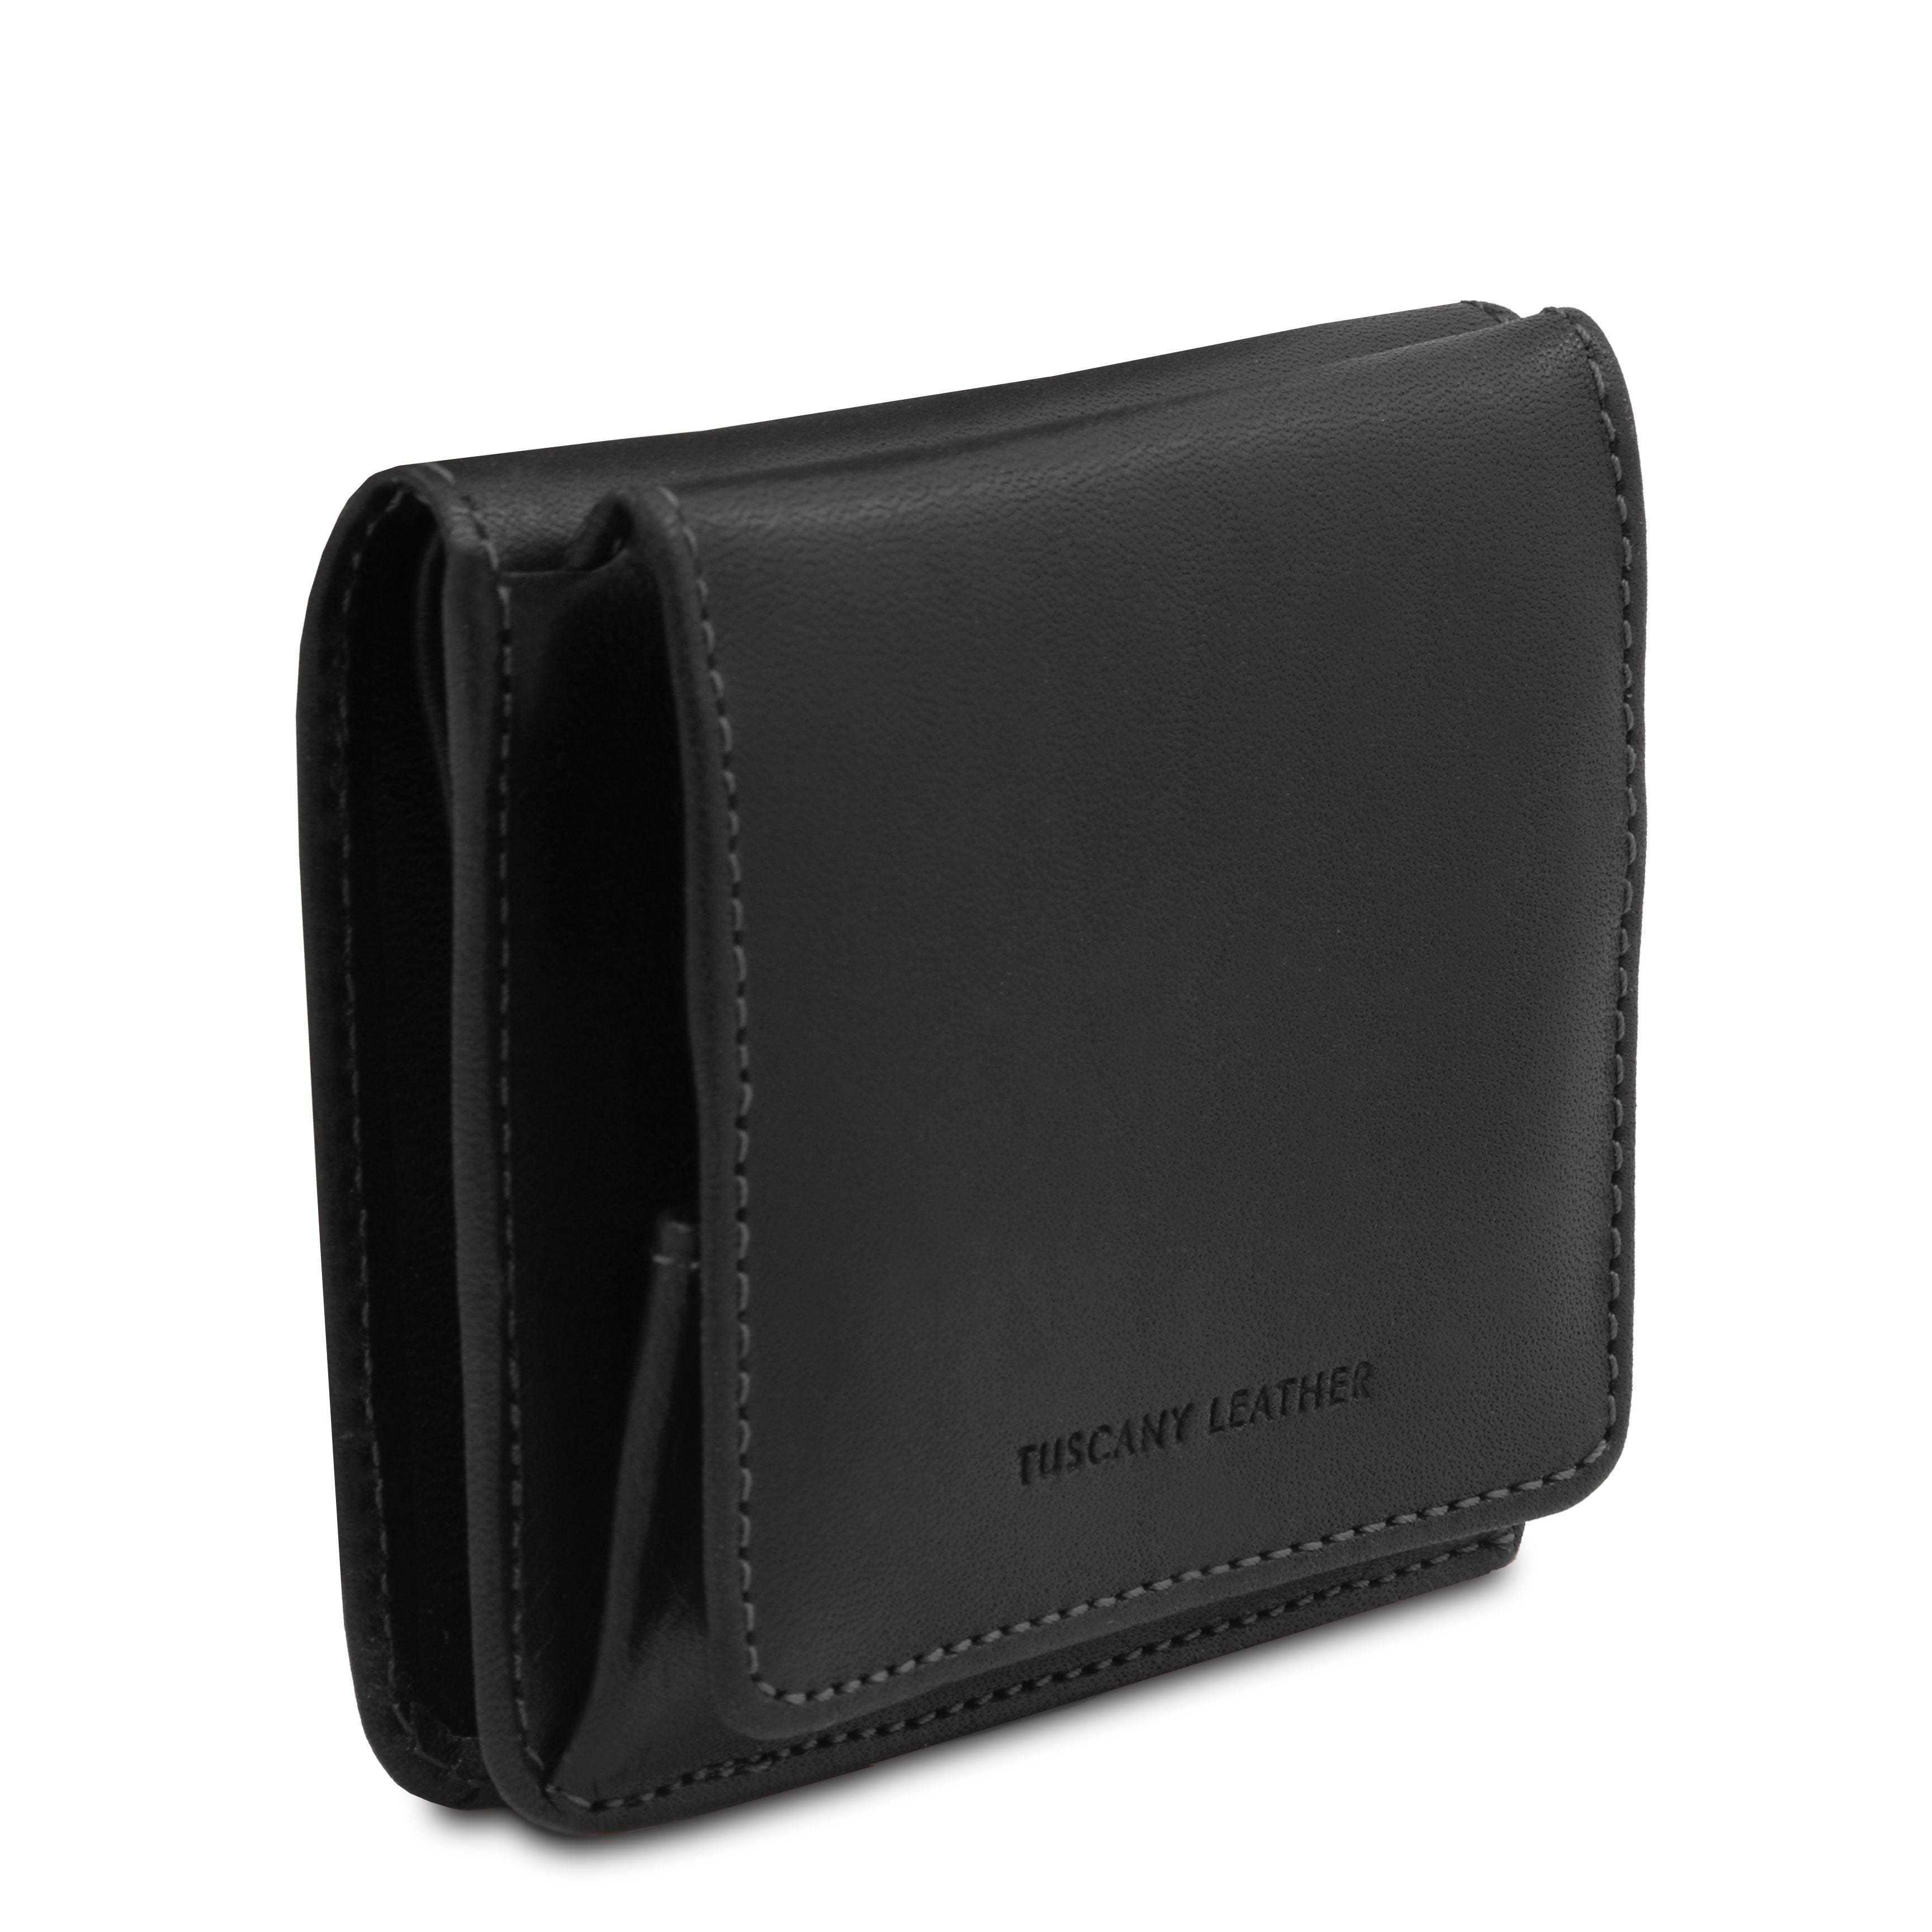 Leather wallet with coin pocket | TL142059 - www.sanroccoitalia.it ...